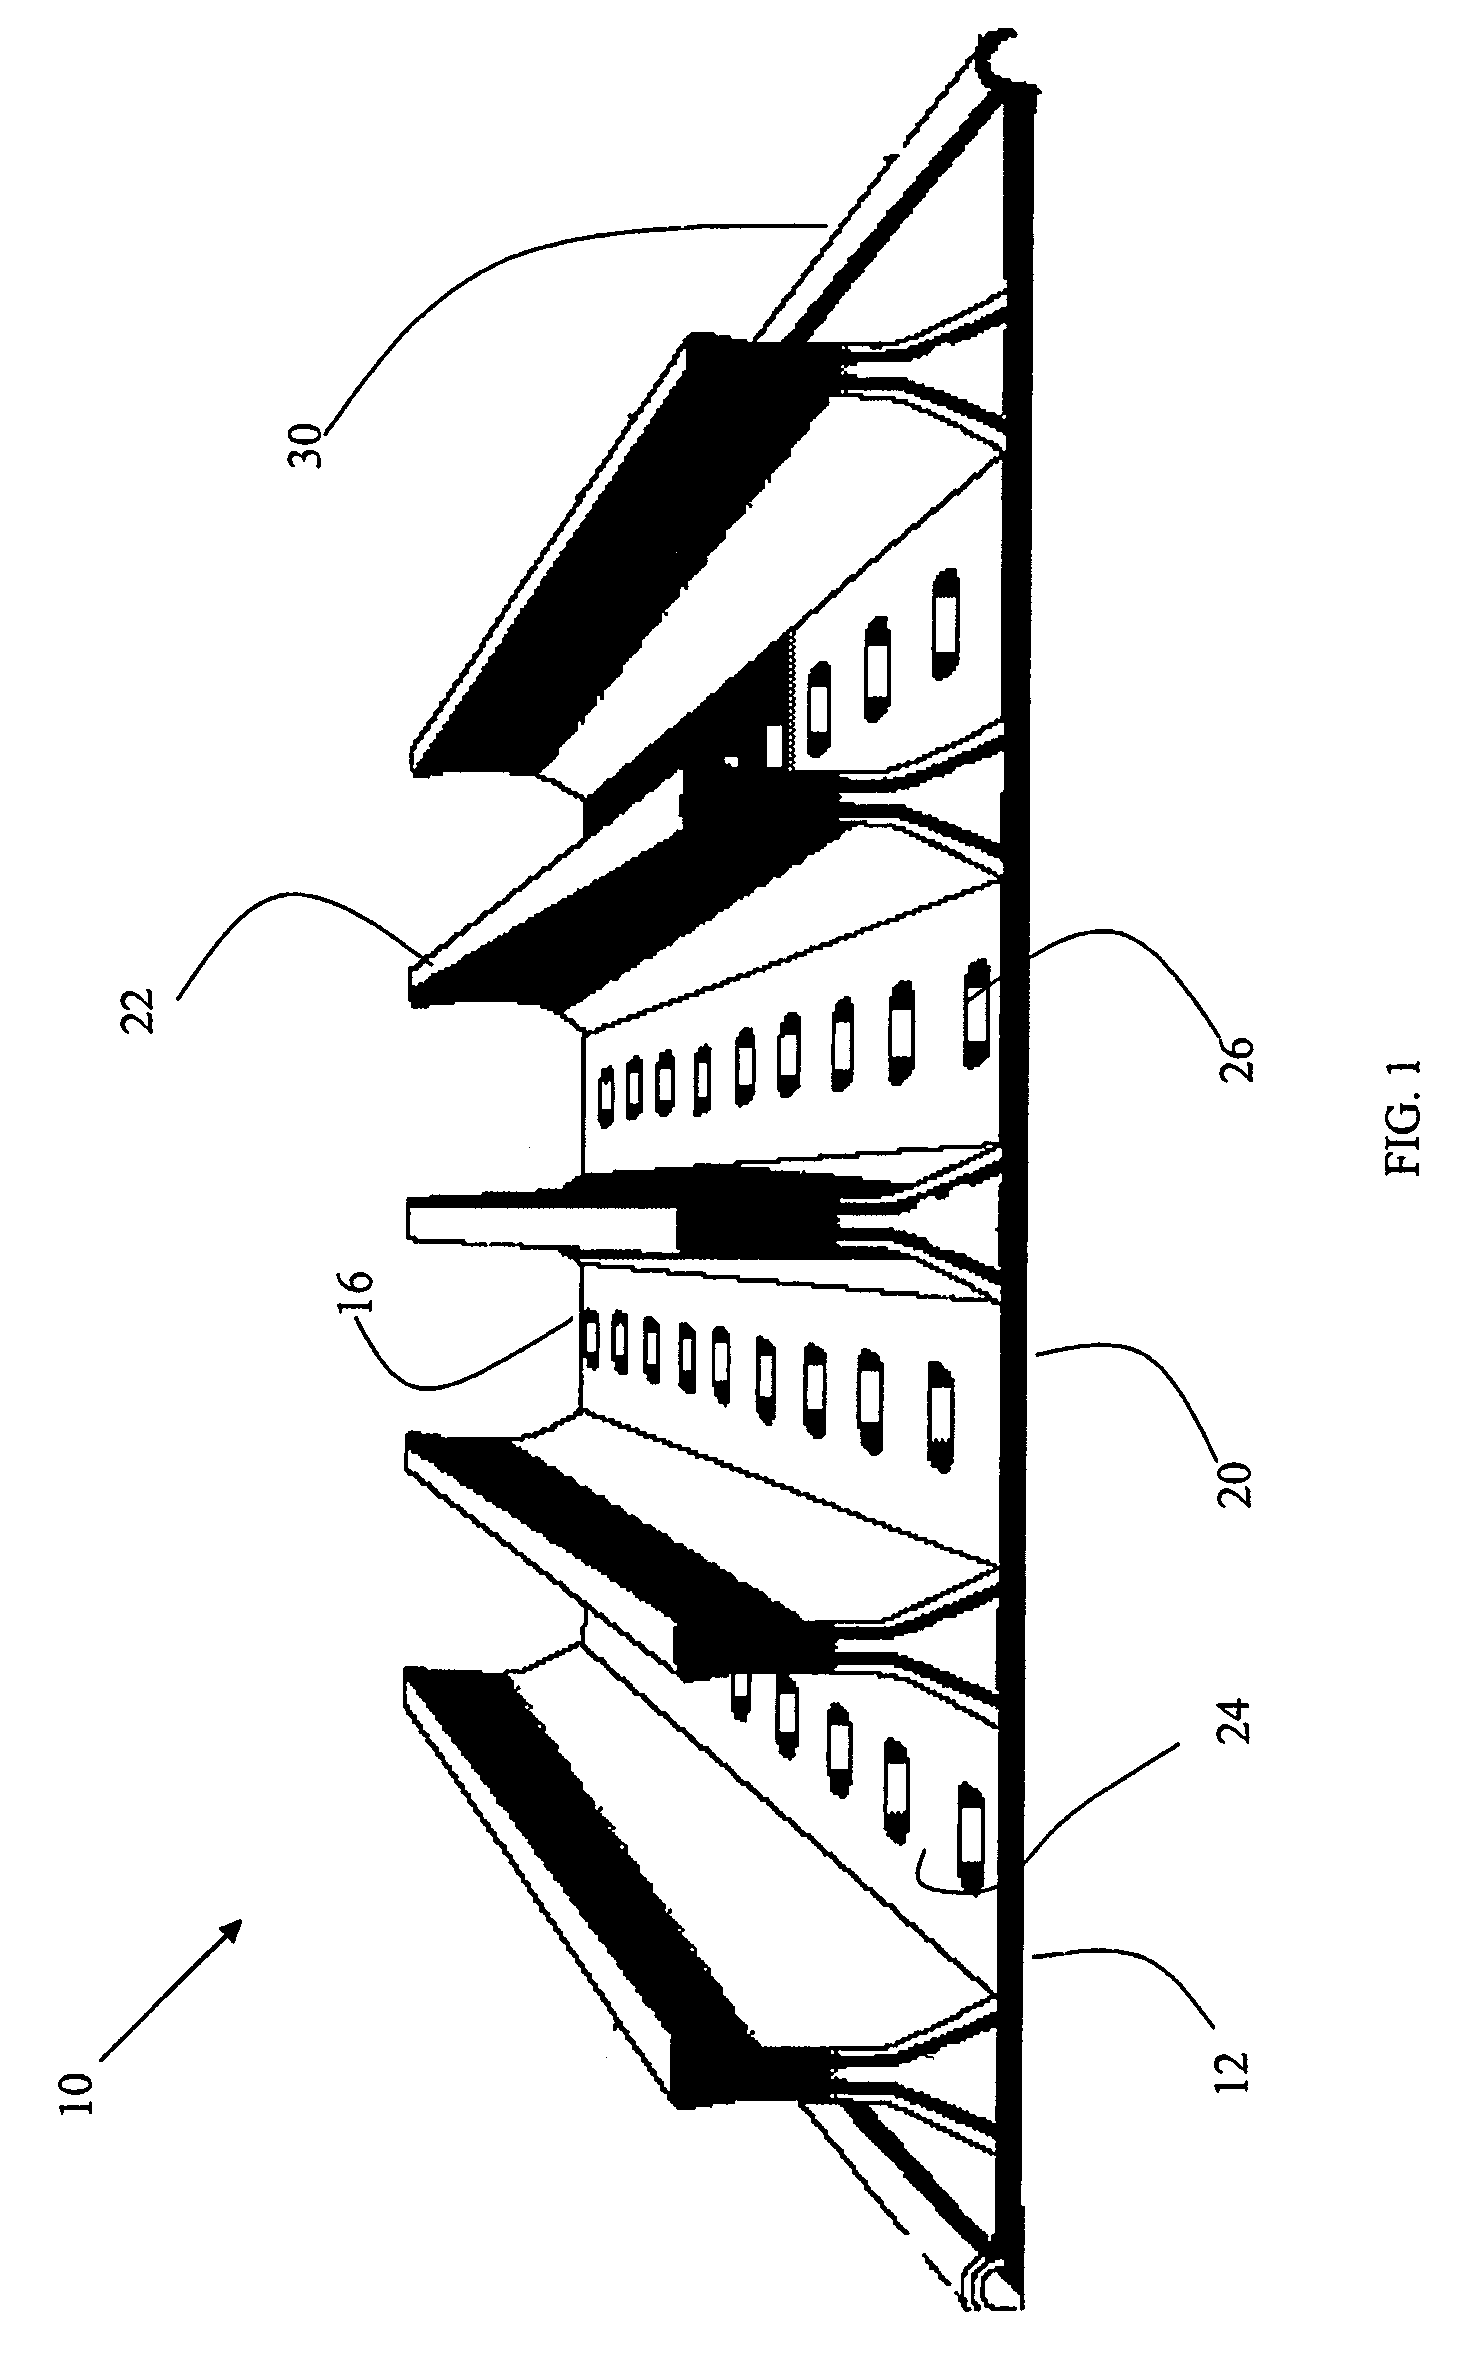 System and device for grilling foods